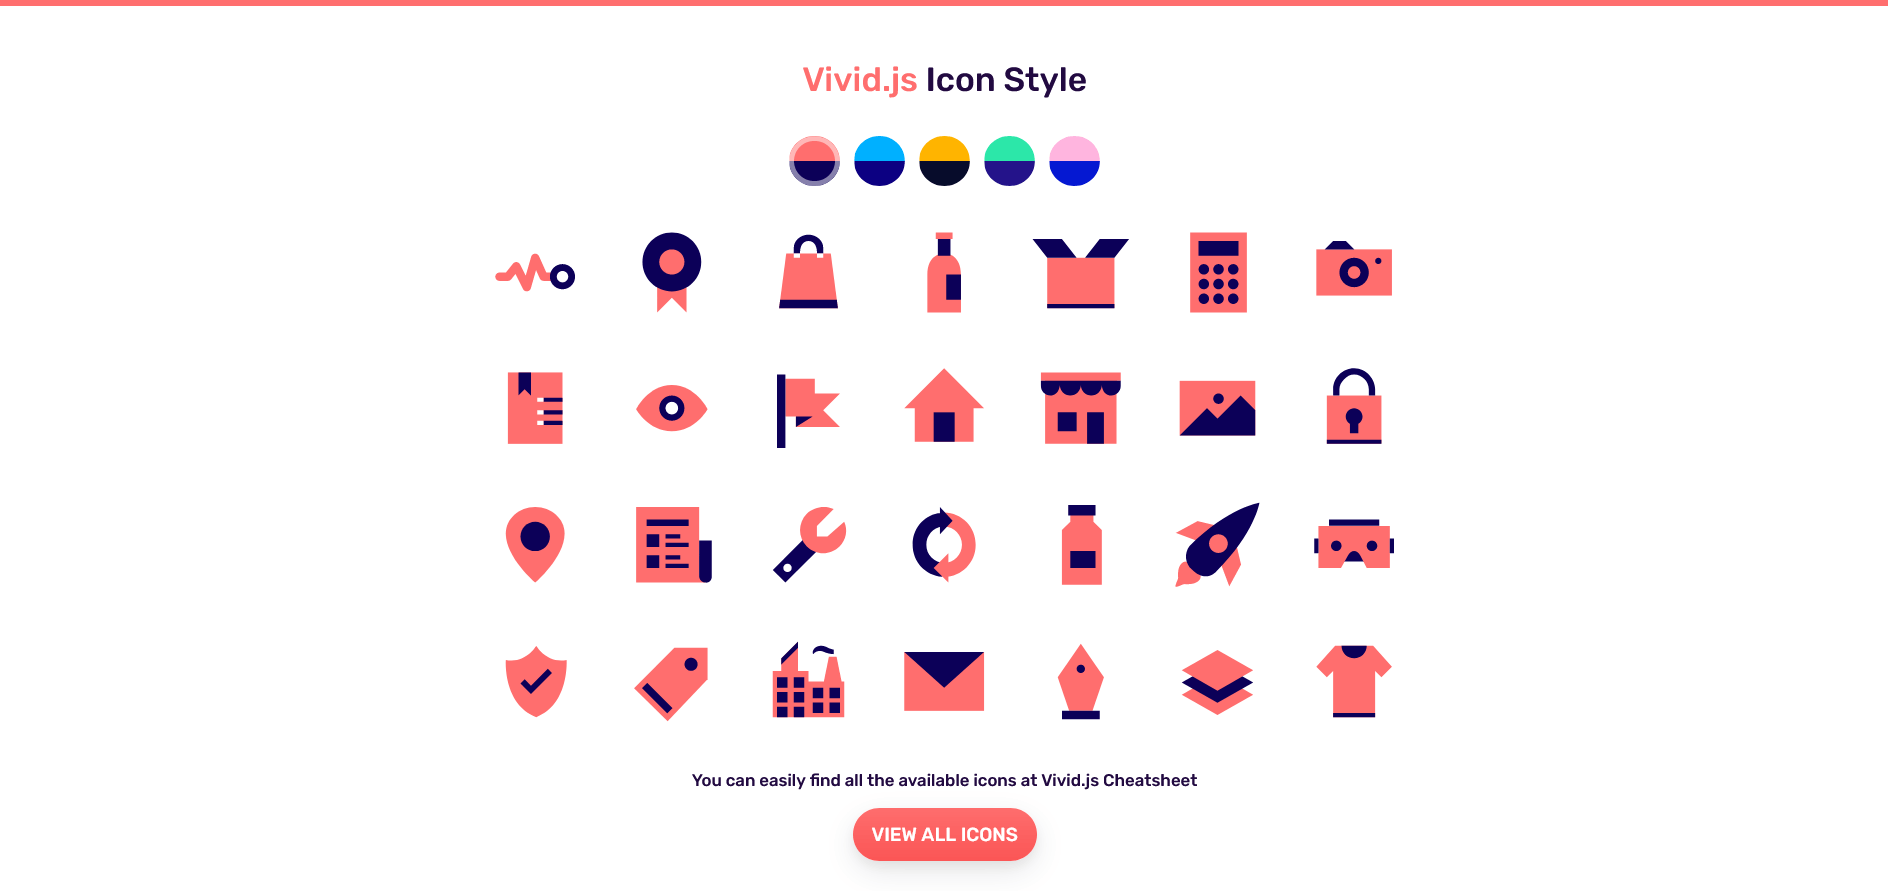 Screenshot 2021-04-30 at 08-05-50 Free Open Source SVG Icons Set Pack and Library [100+ Icons] - Vivid js.png